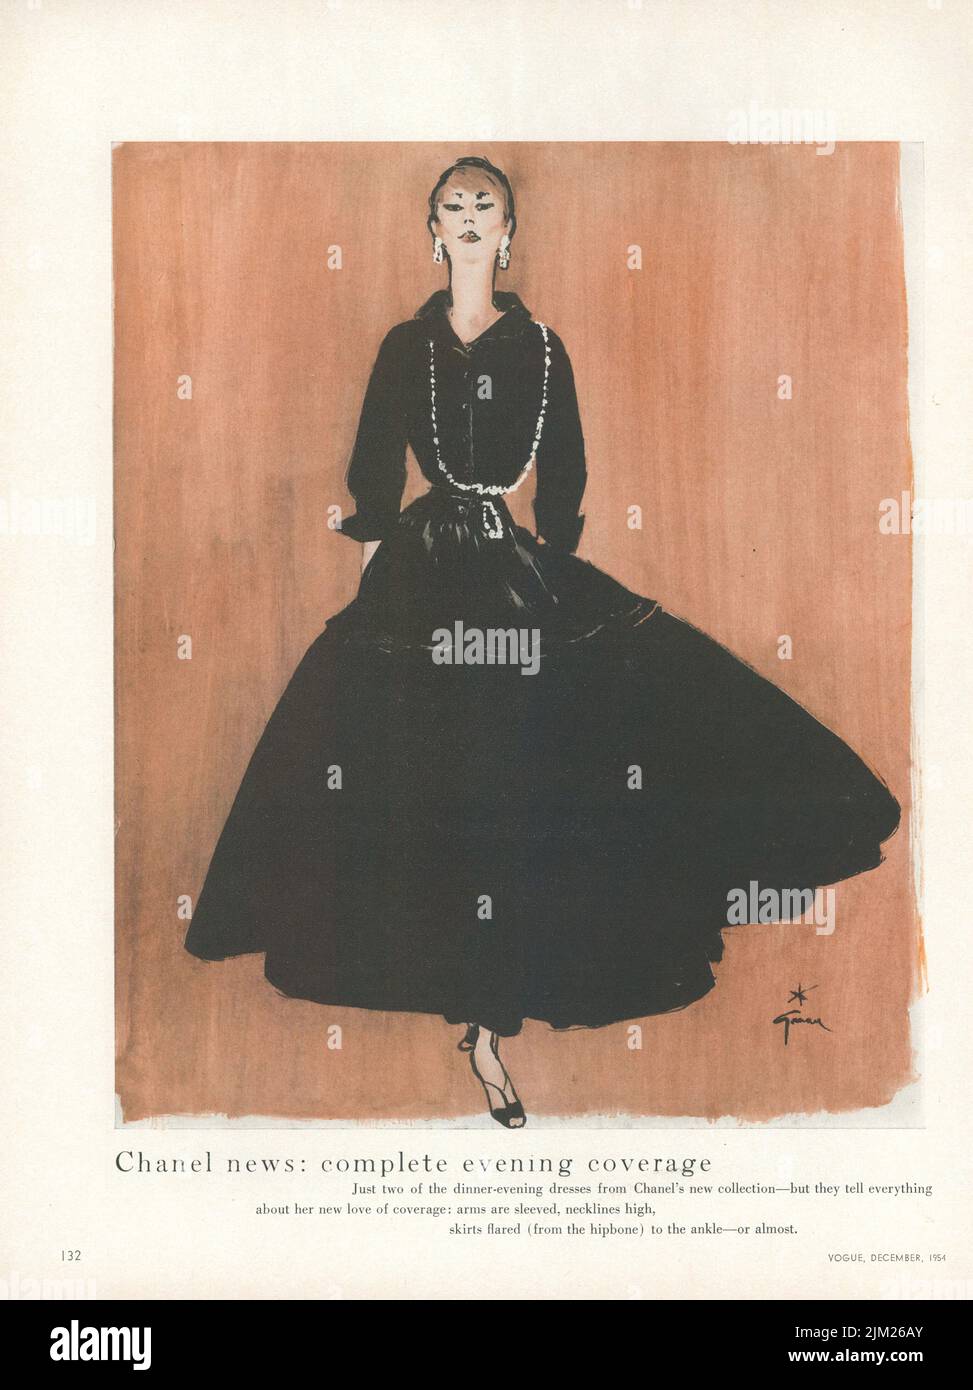 Chanel News: Complete Evening Coverage?, Vogue, December 1, 1954;Offset printing;Modern;1954;France;Private Collection;Fashion, Magazine, Applied Arts, Gown, Dress, Frock, Clothes, Wear, Attire, Clothing, Journal, Gabrielle Chanel, Coco Chanel, Chanel, ;;Genre,;Graphic arts; VG-Bild-Kunst Bonn;. Author: René Gruau. Stock Photo